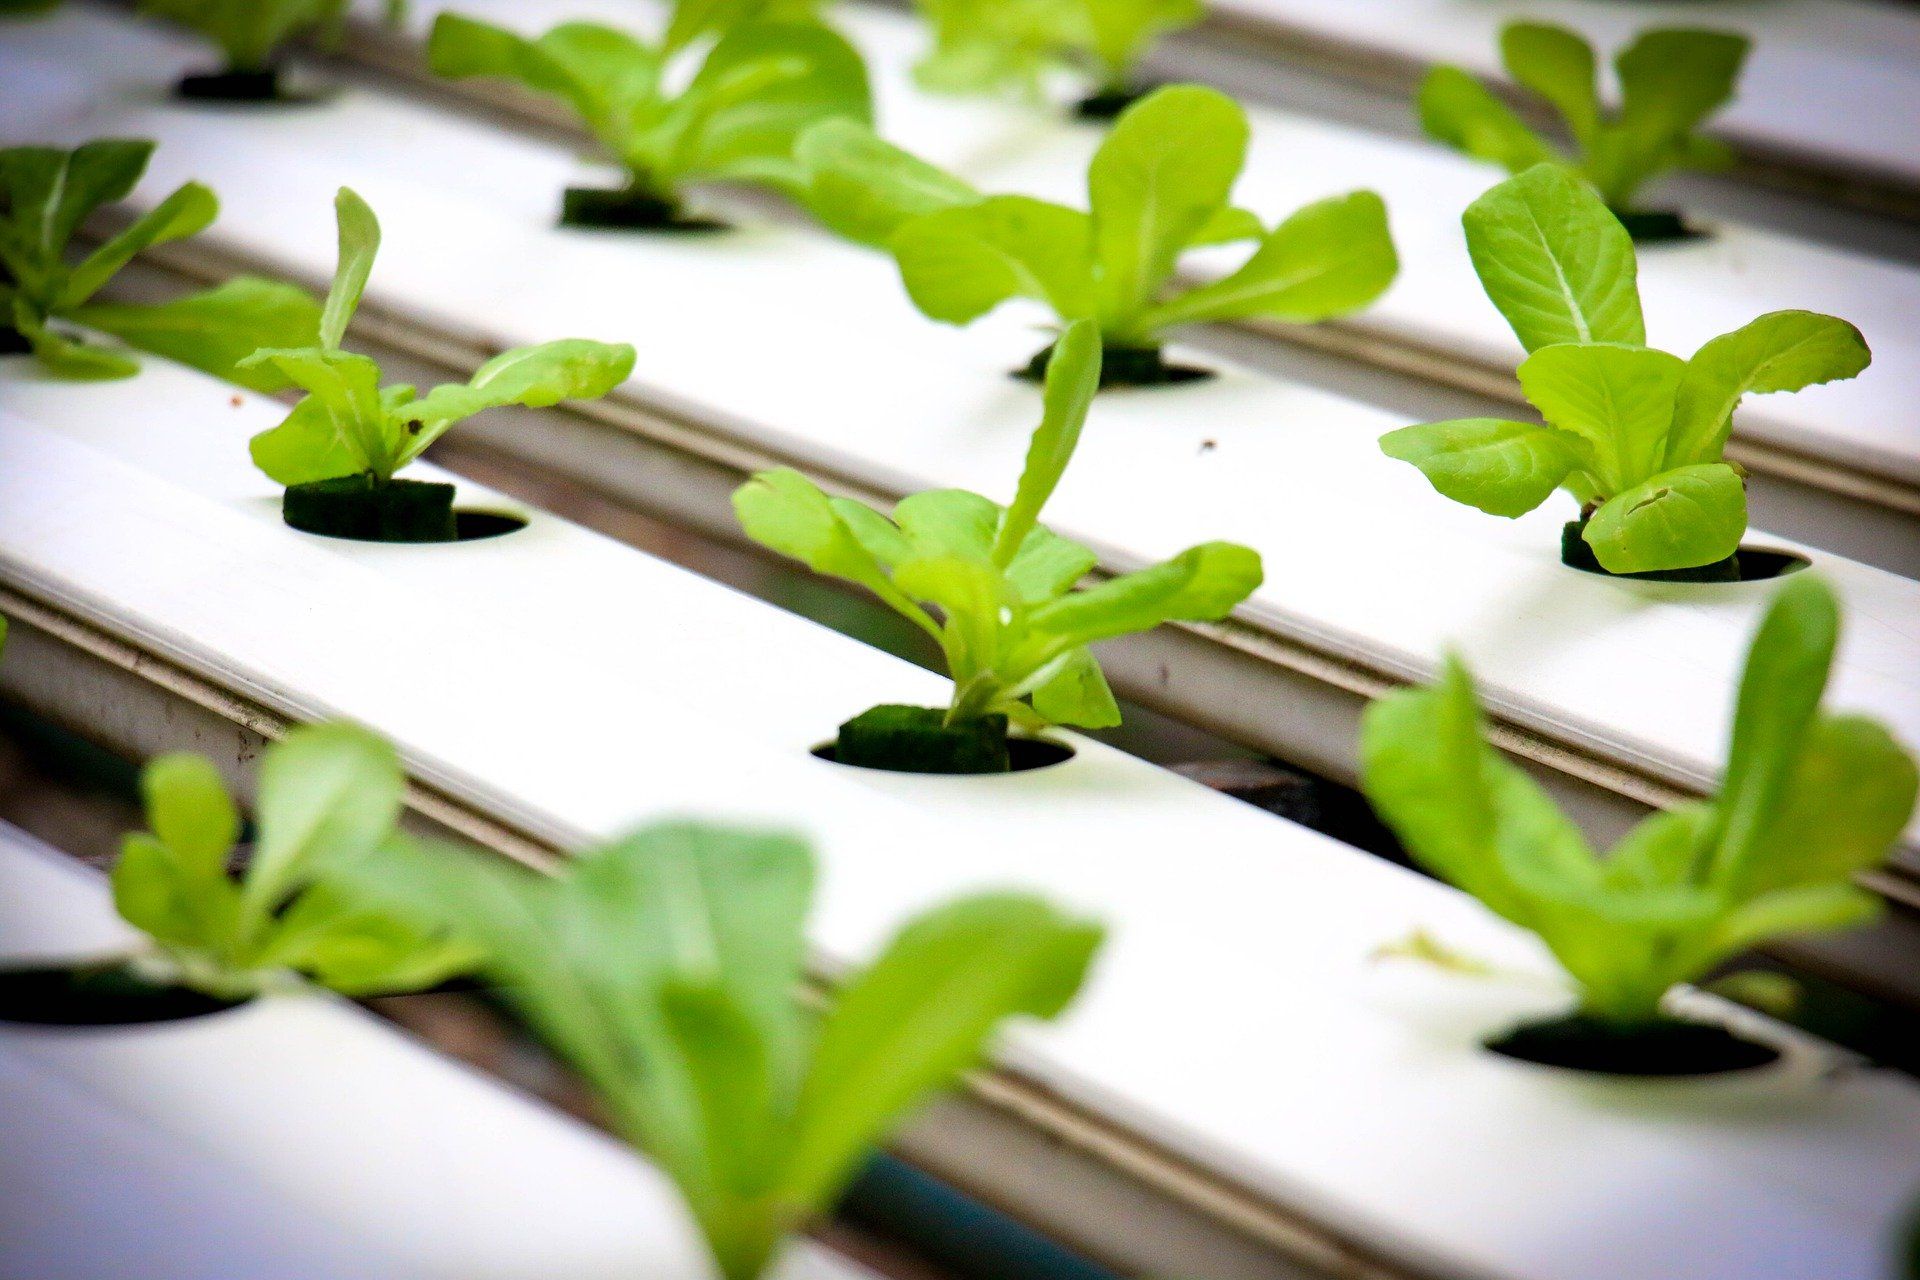 Advantages of Having a Hydroponic System